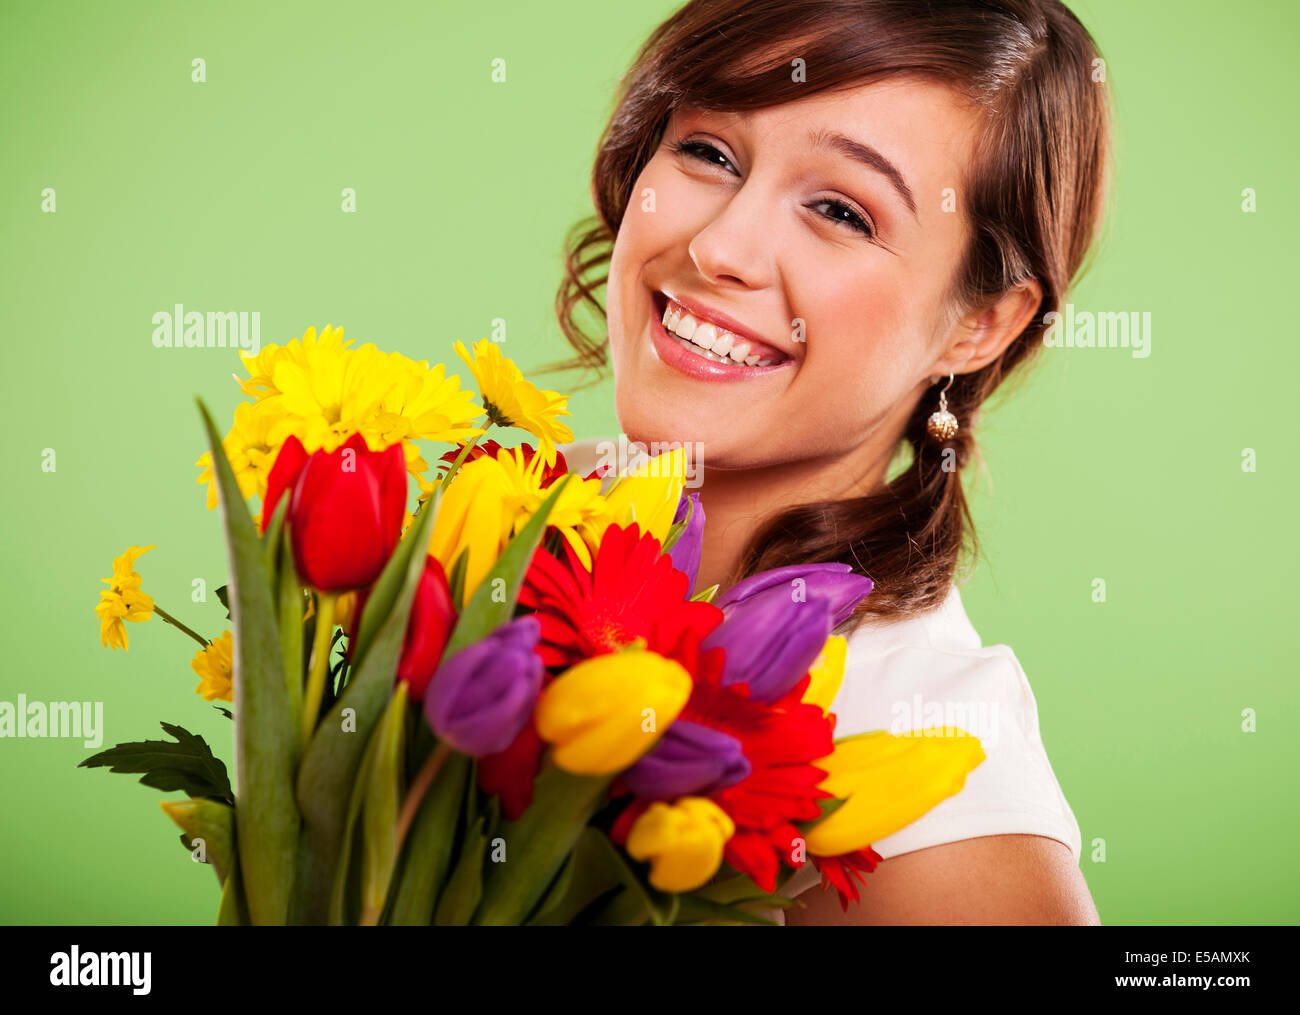 Portrait of a smiling woman with colorful flowers, Debica, Poland Debica, Poland Stock Photo